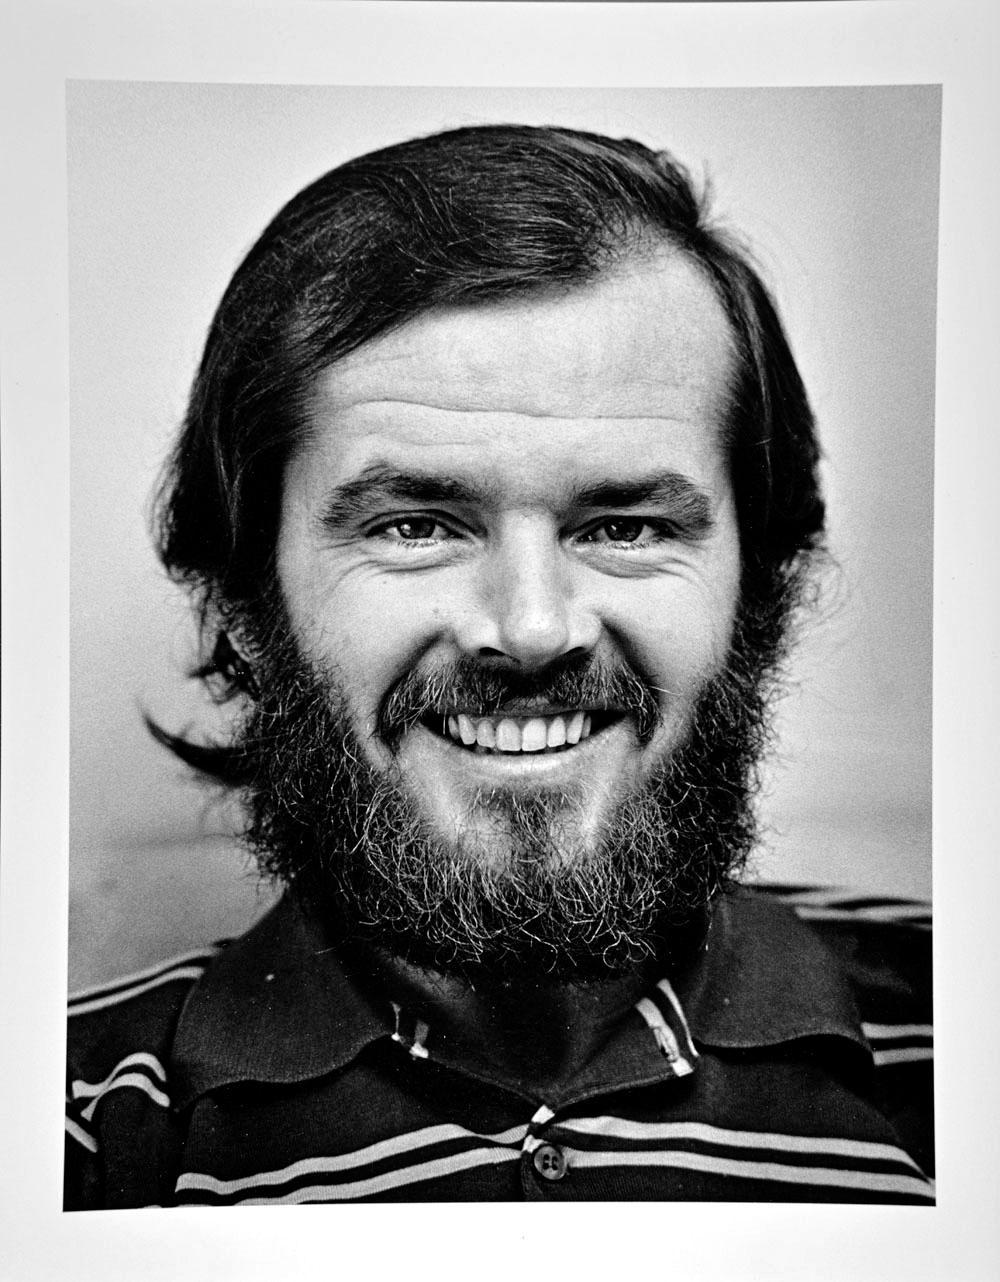 Academy Award-winning Actor Jack Nicholson, the year he starred in 'Easy Rider' 